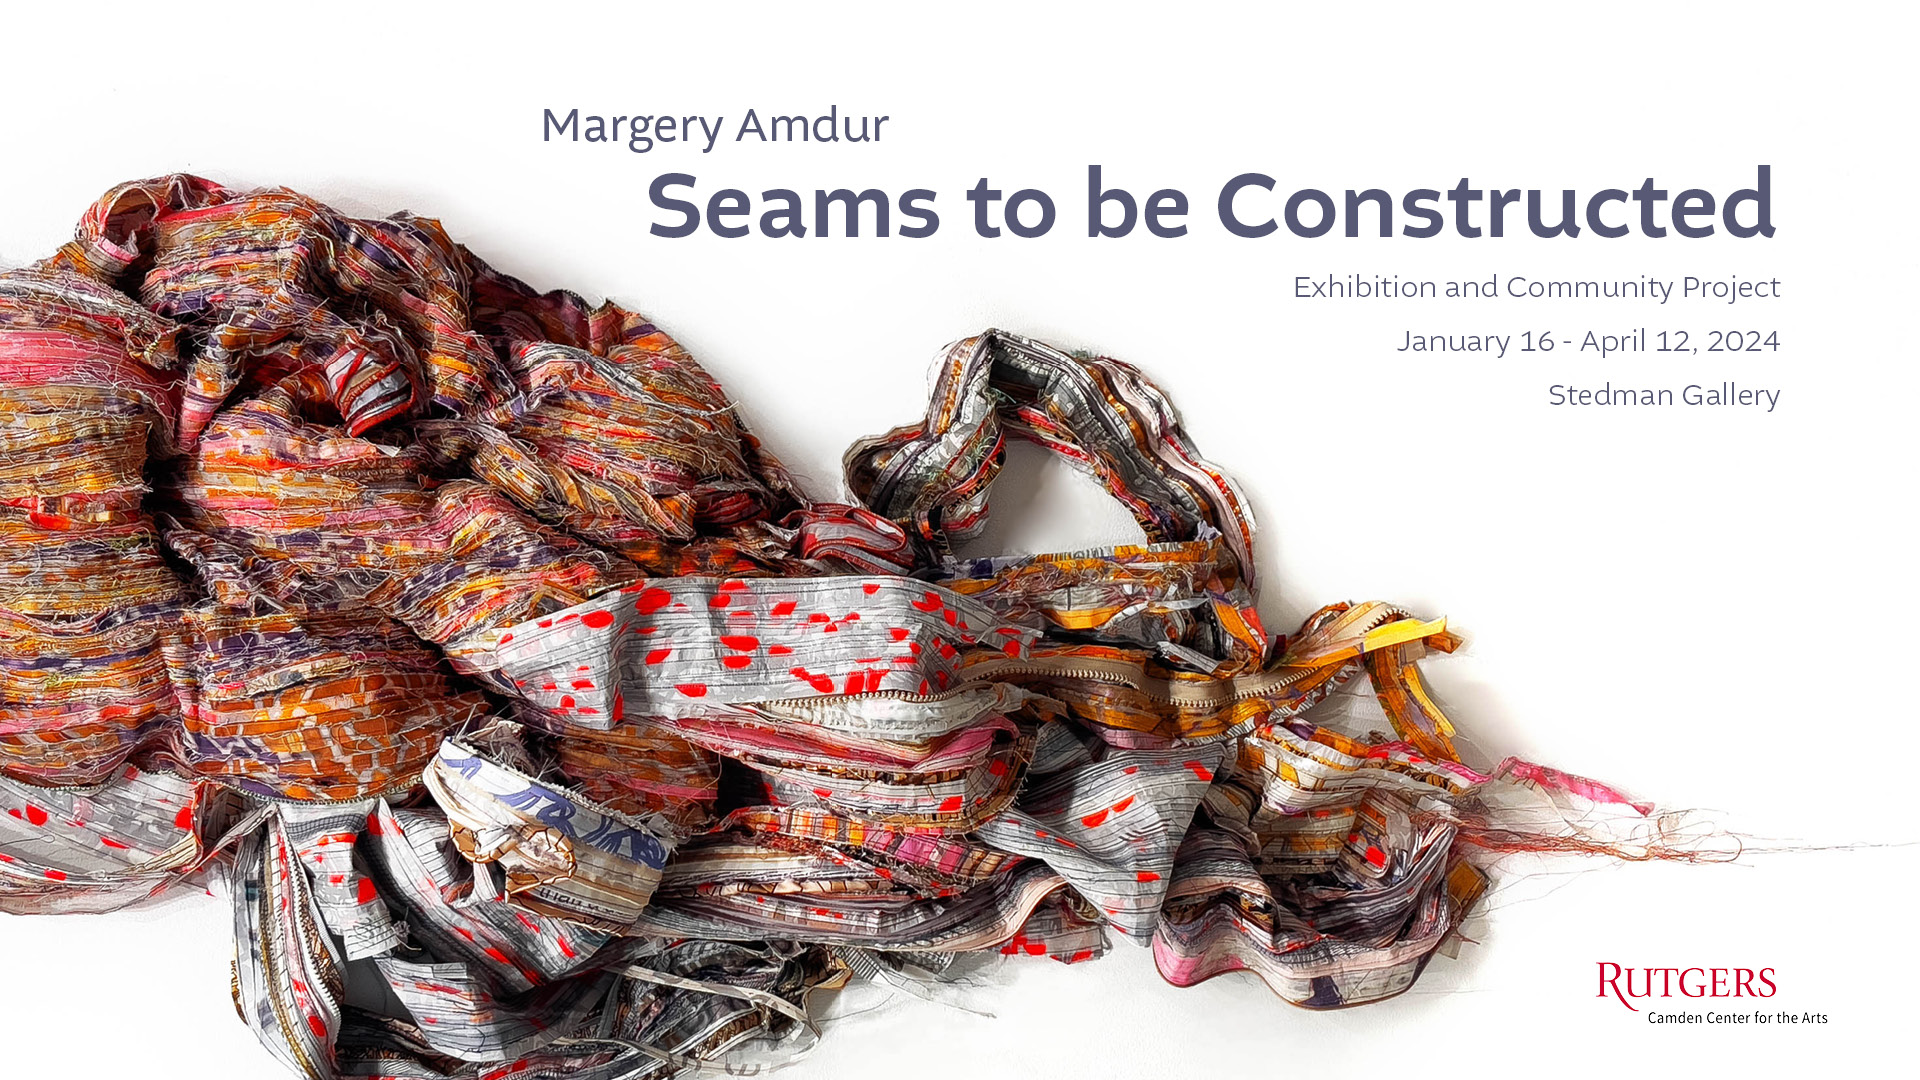 Margery Amdur
Seams to be Constructed
Exhibition and Community Project
January 16 - April 12, 2024
Stedman Gallery
Rutgers-Camden Center for the Arts